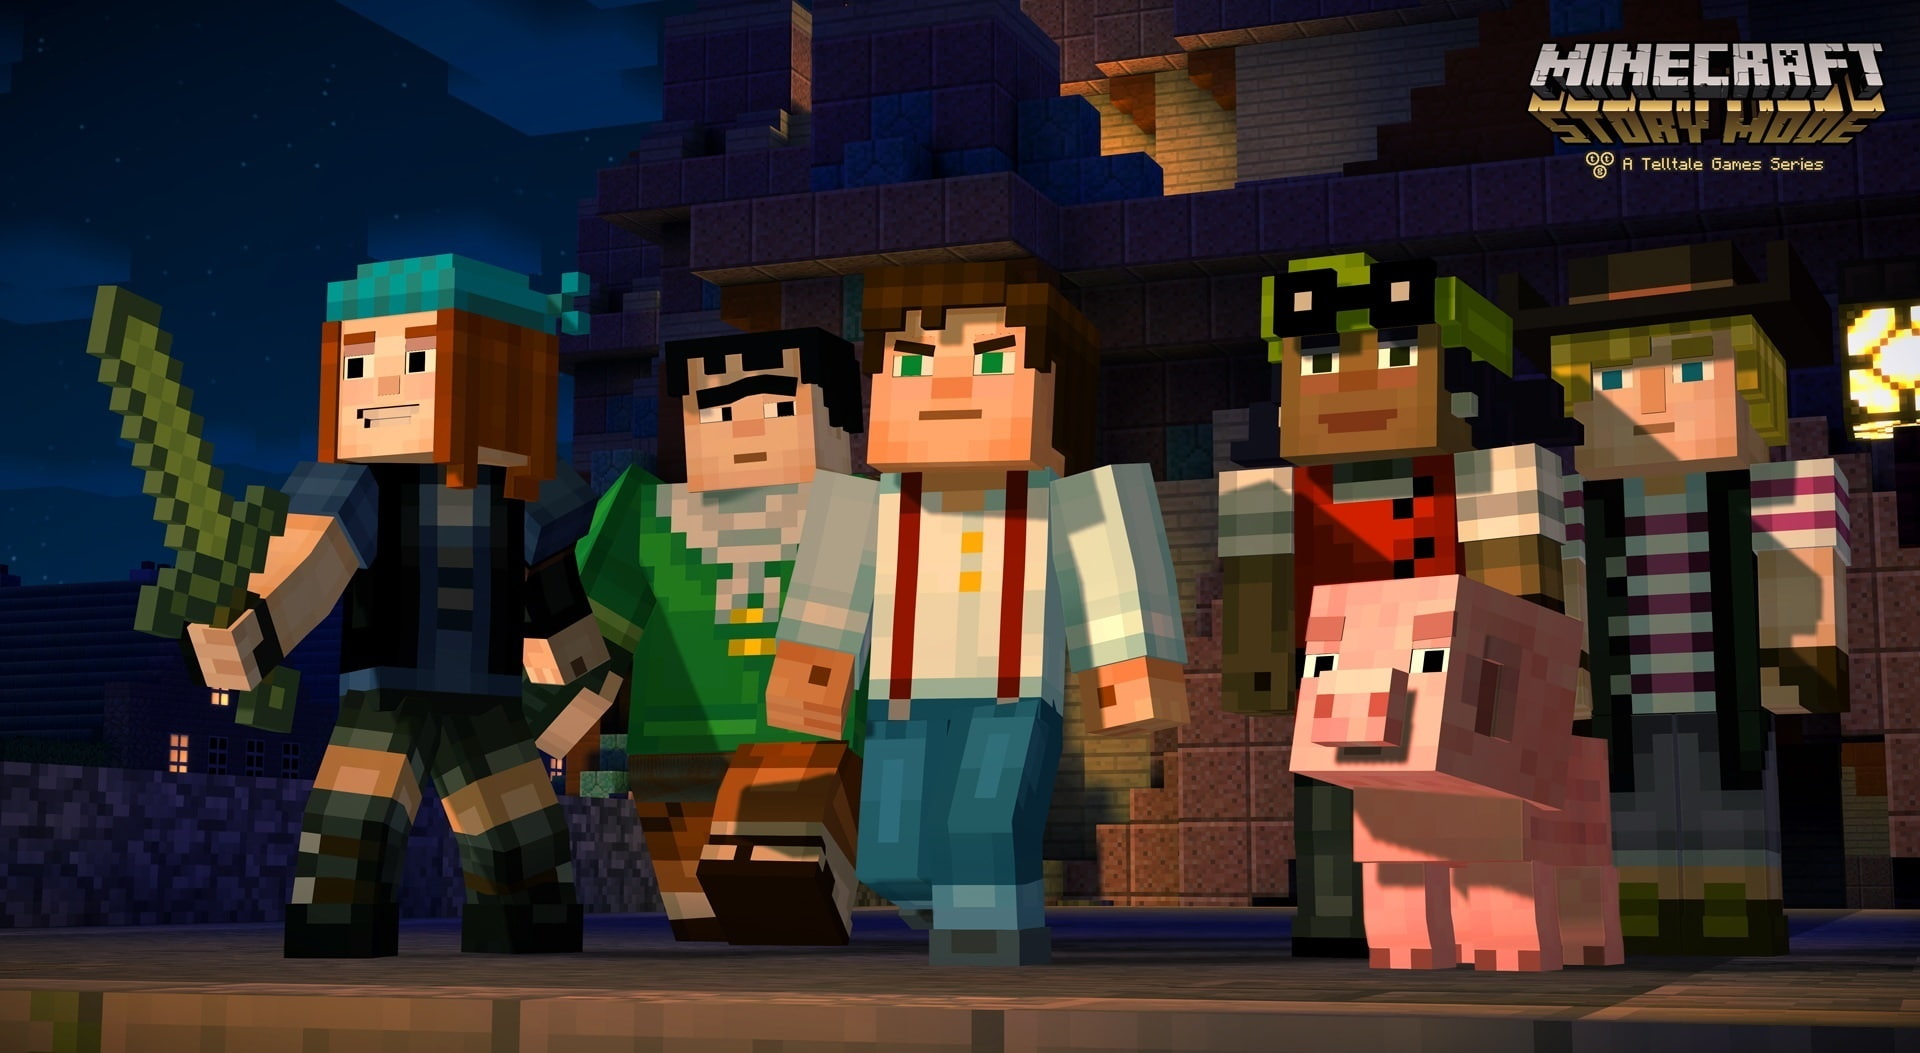 Minecraft Story Mode, Minecraft Story Mode game wallpaper, Games